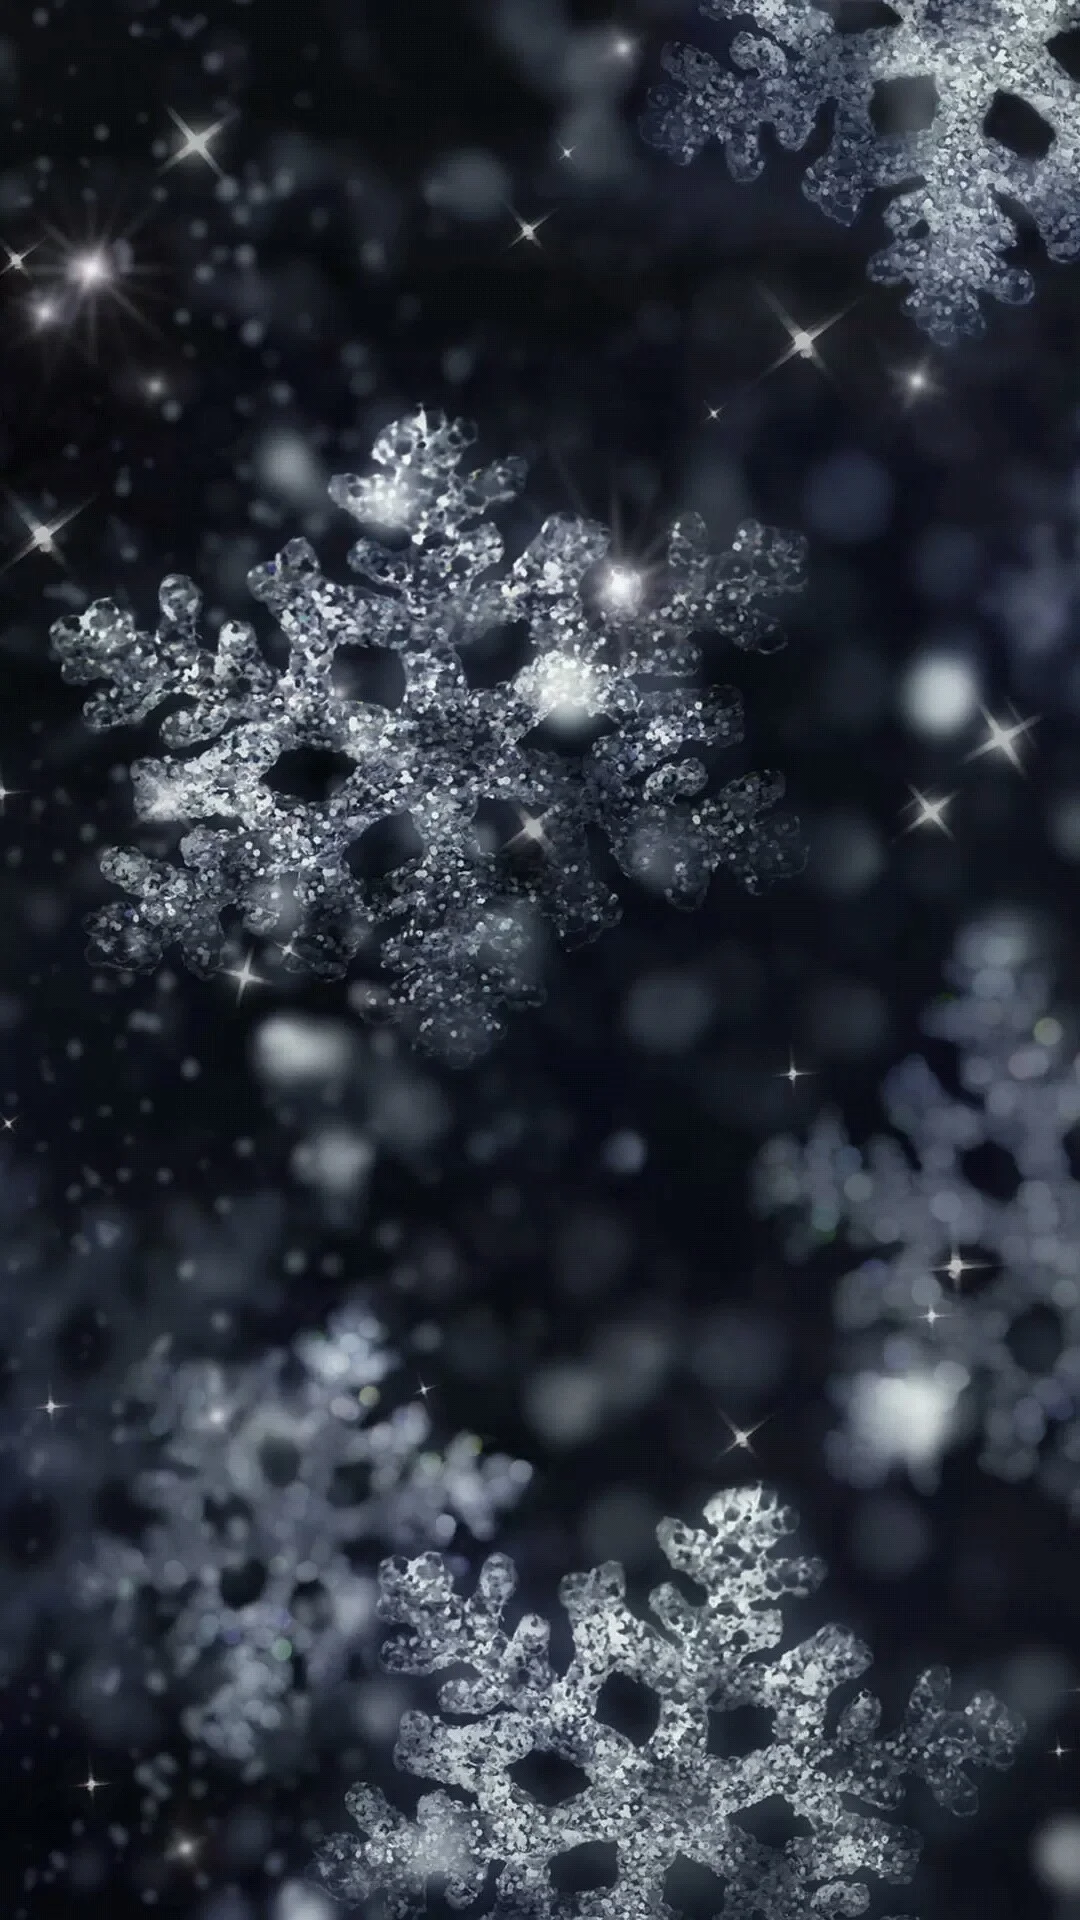 Night glittering snowflakes 1080 x 1920 Wallpapers available for free download